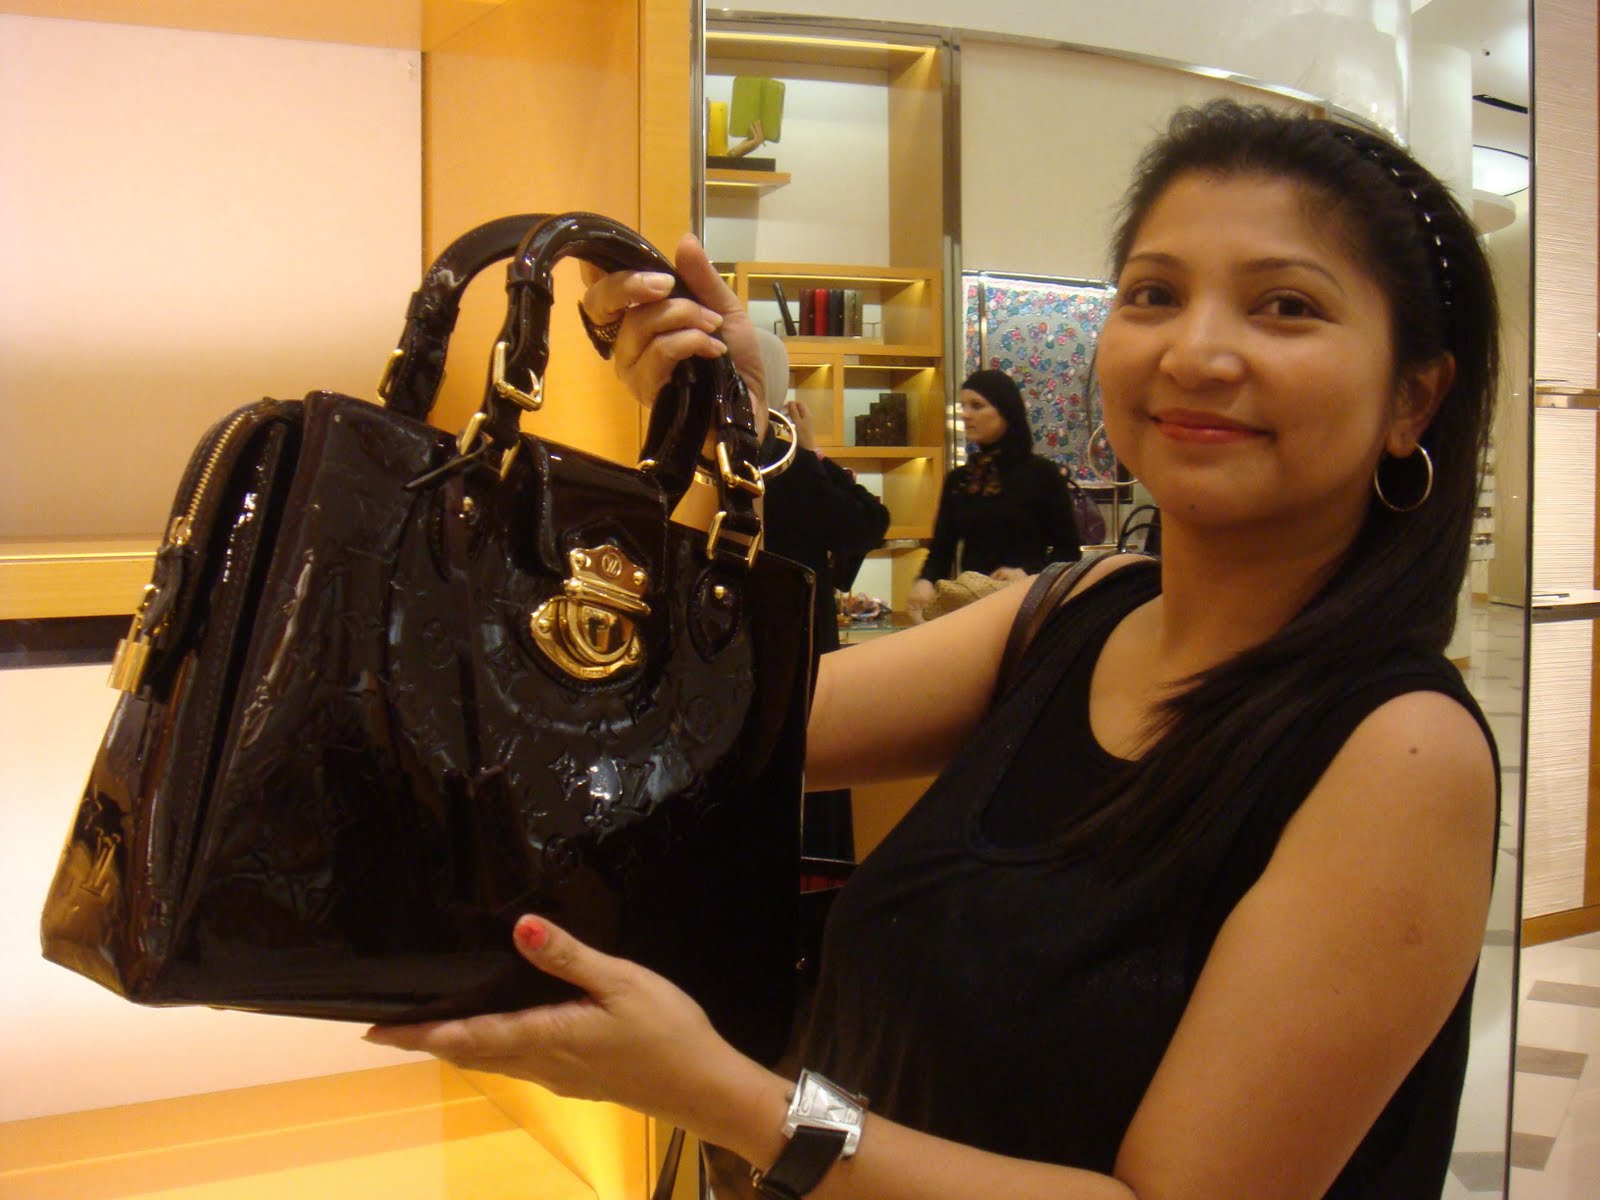 In LVoe with Louis Vuitton: OooohhhhI LVoe a shopping spree!